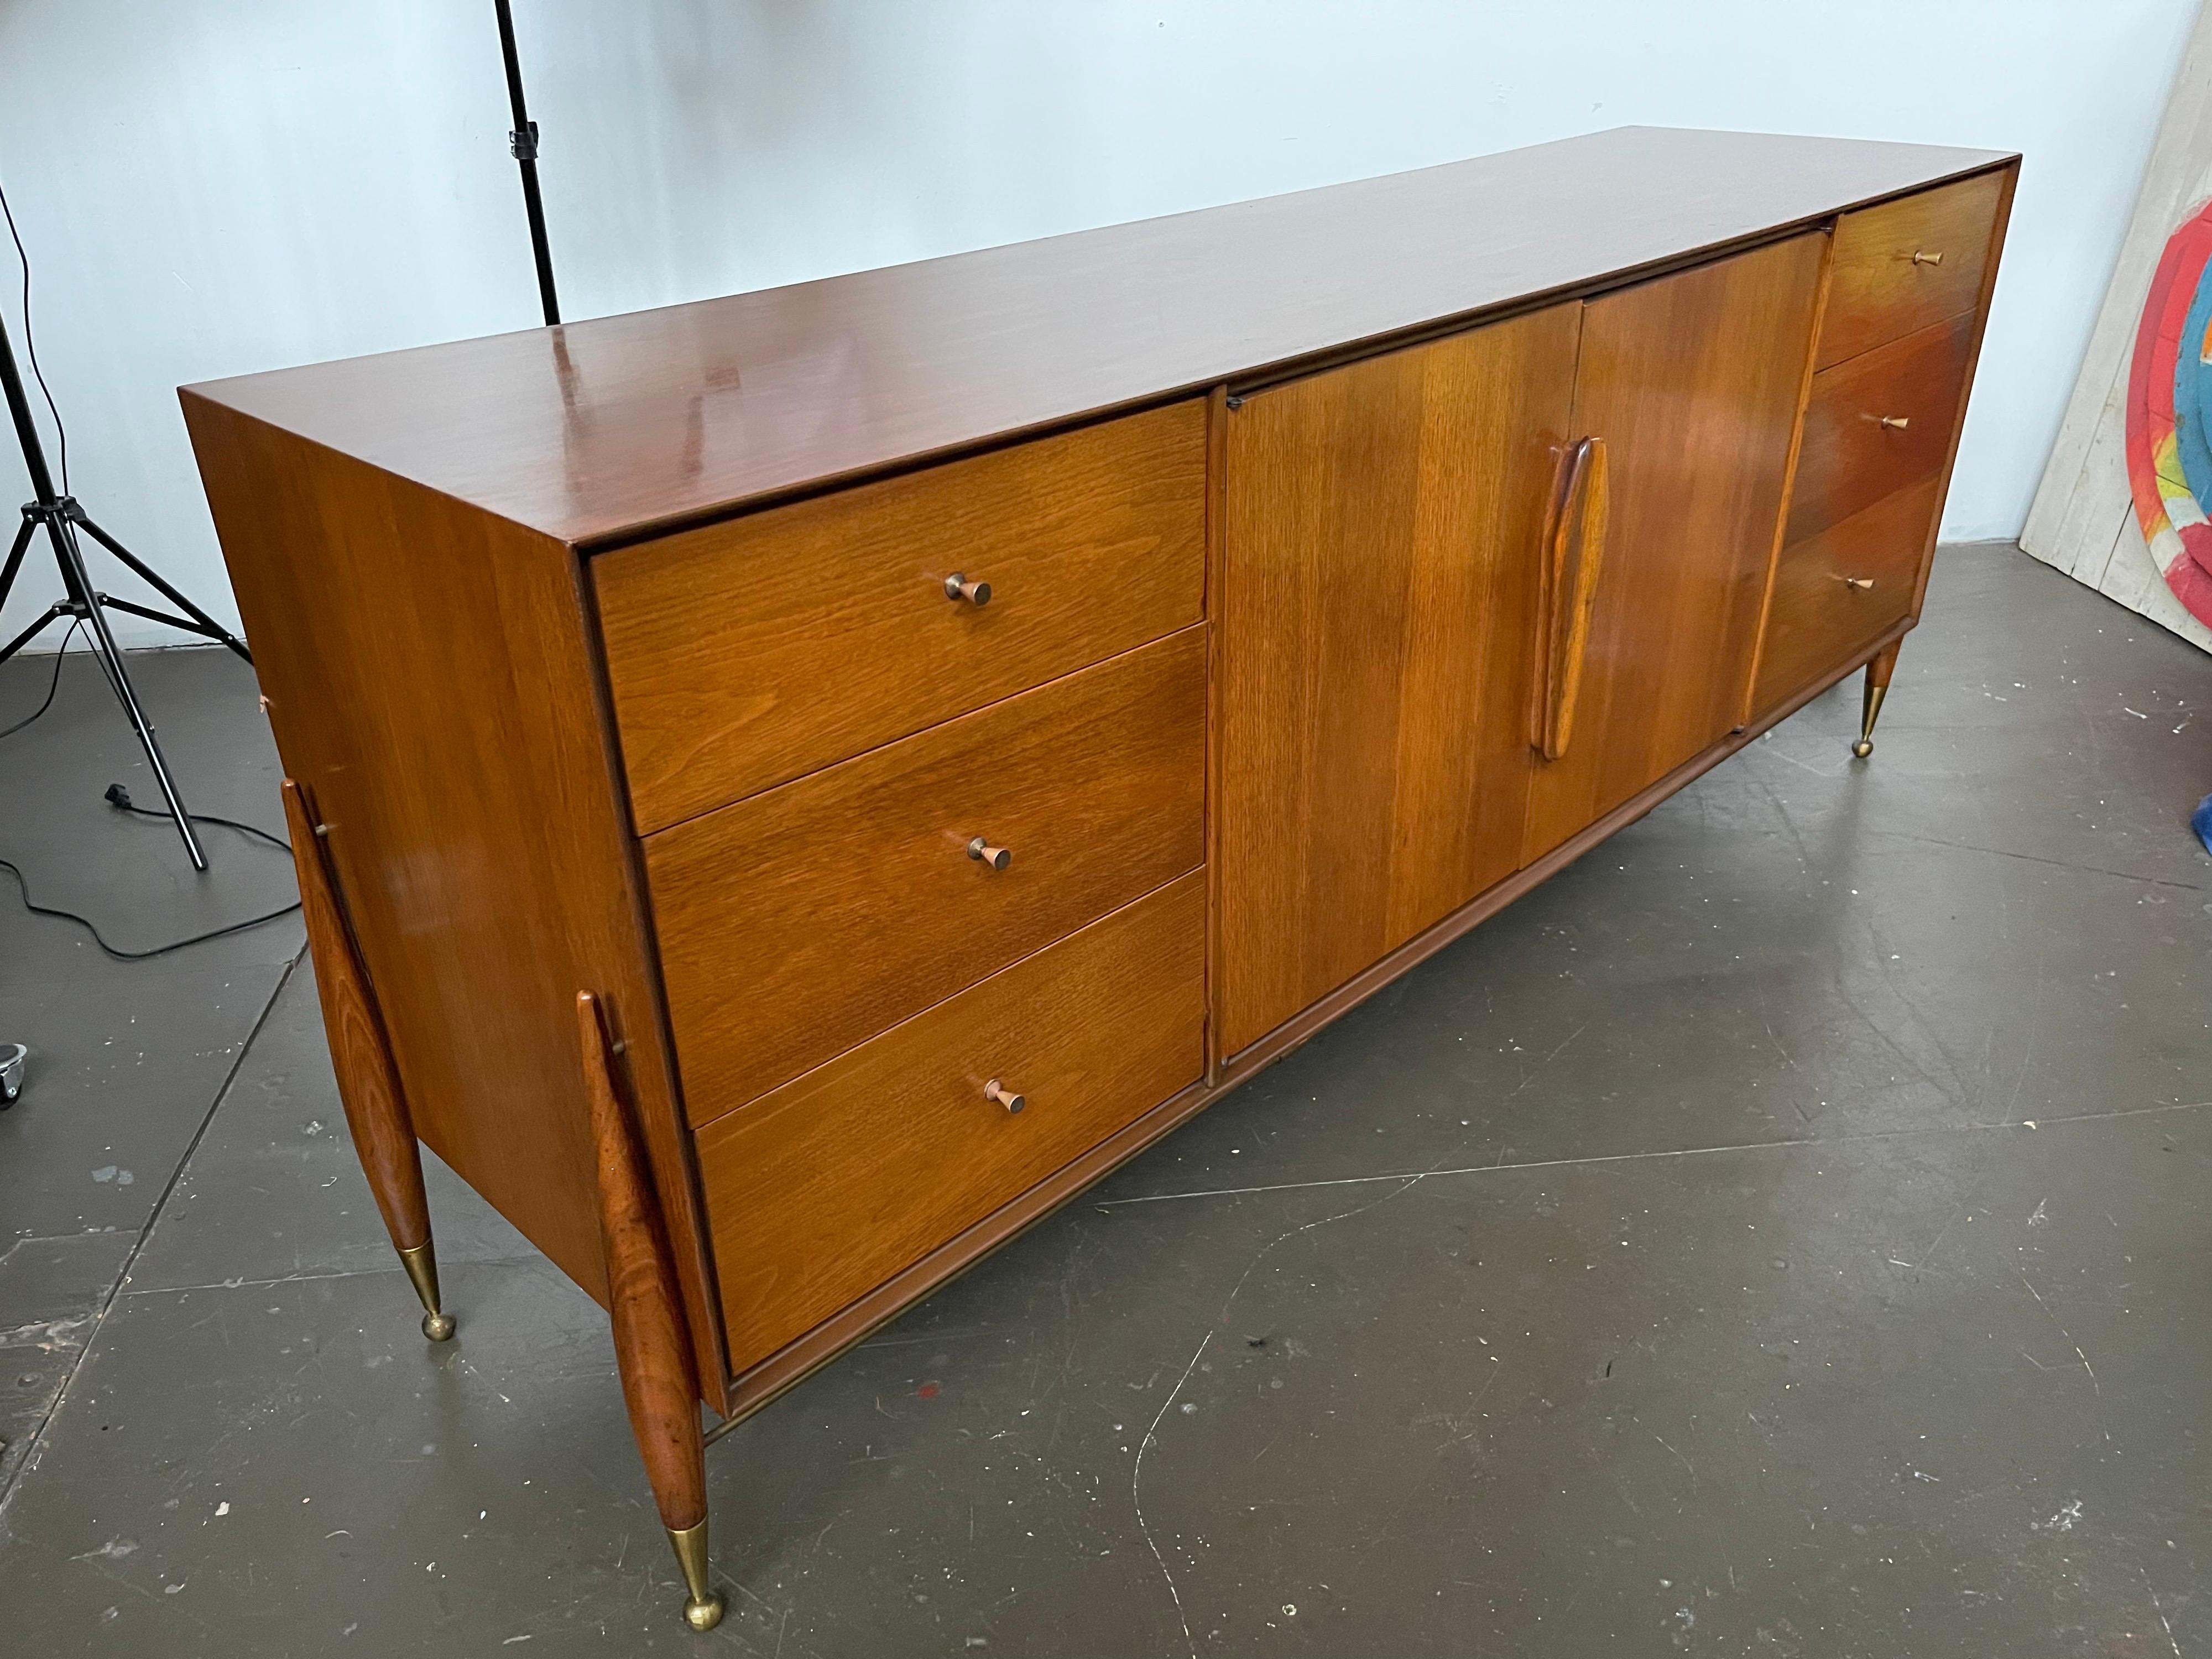 Scarce piece by New Jersey custom furniture makers - Specialty Woodcraft, purchased by the original owner in 1957. The couple didn't have children and it shows in this piece. This long dresser is in original condition with minor spots of wear.